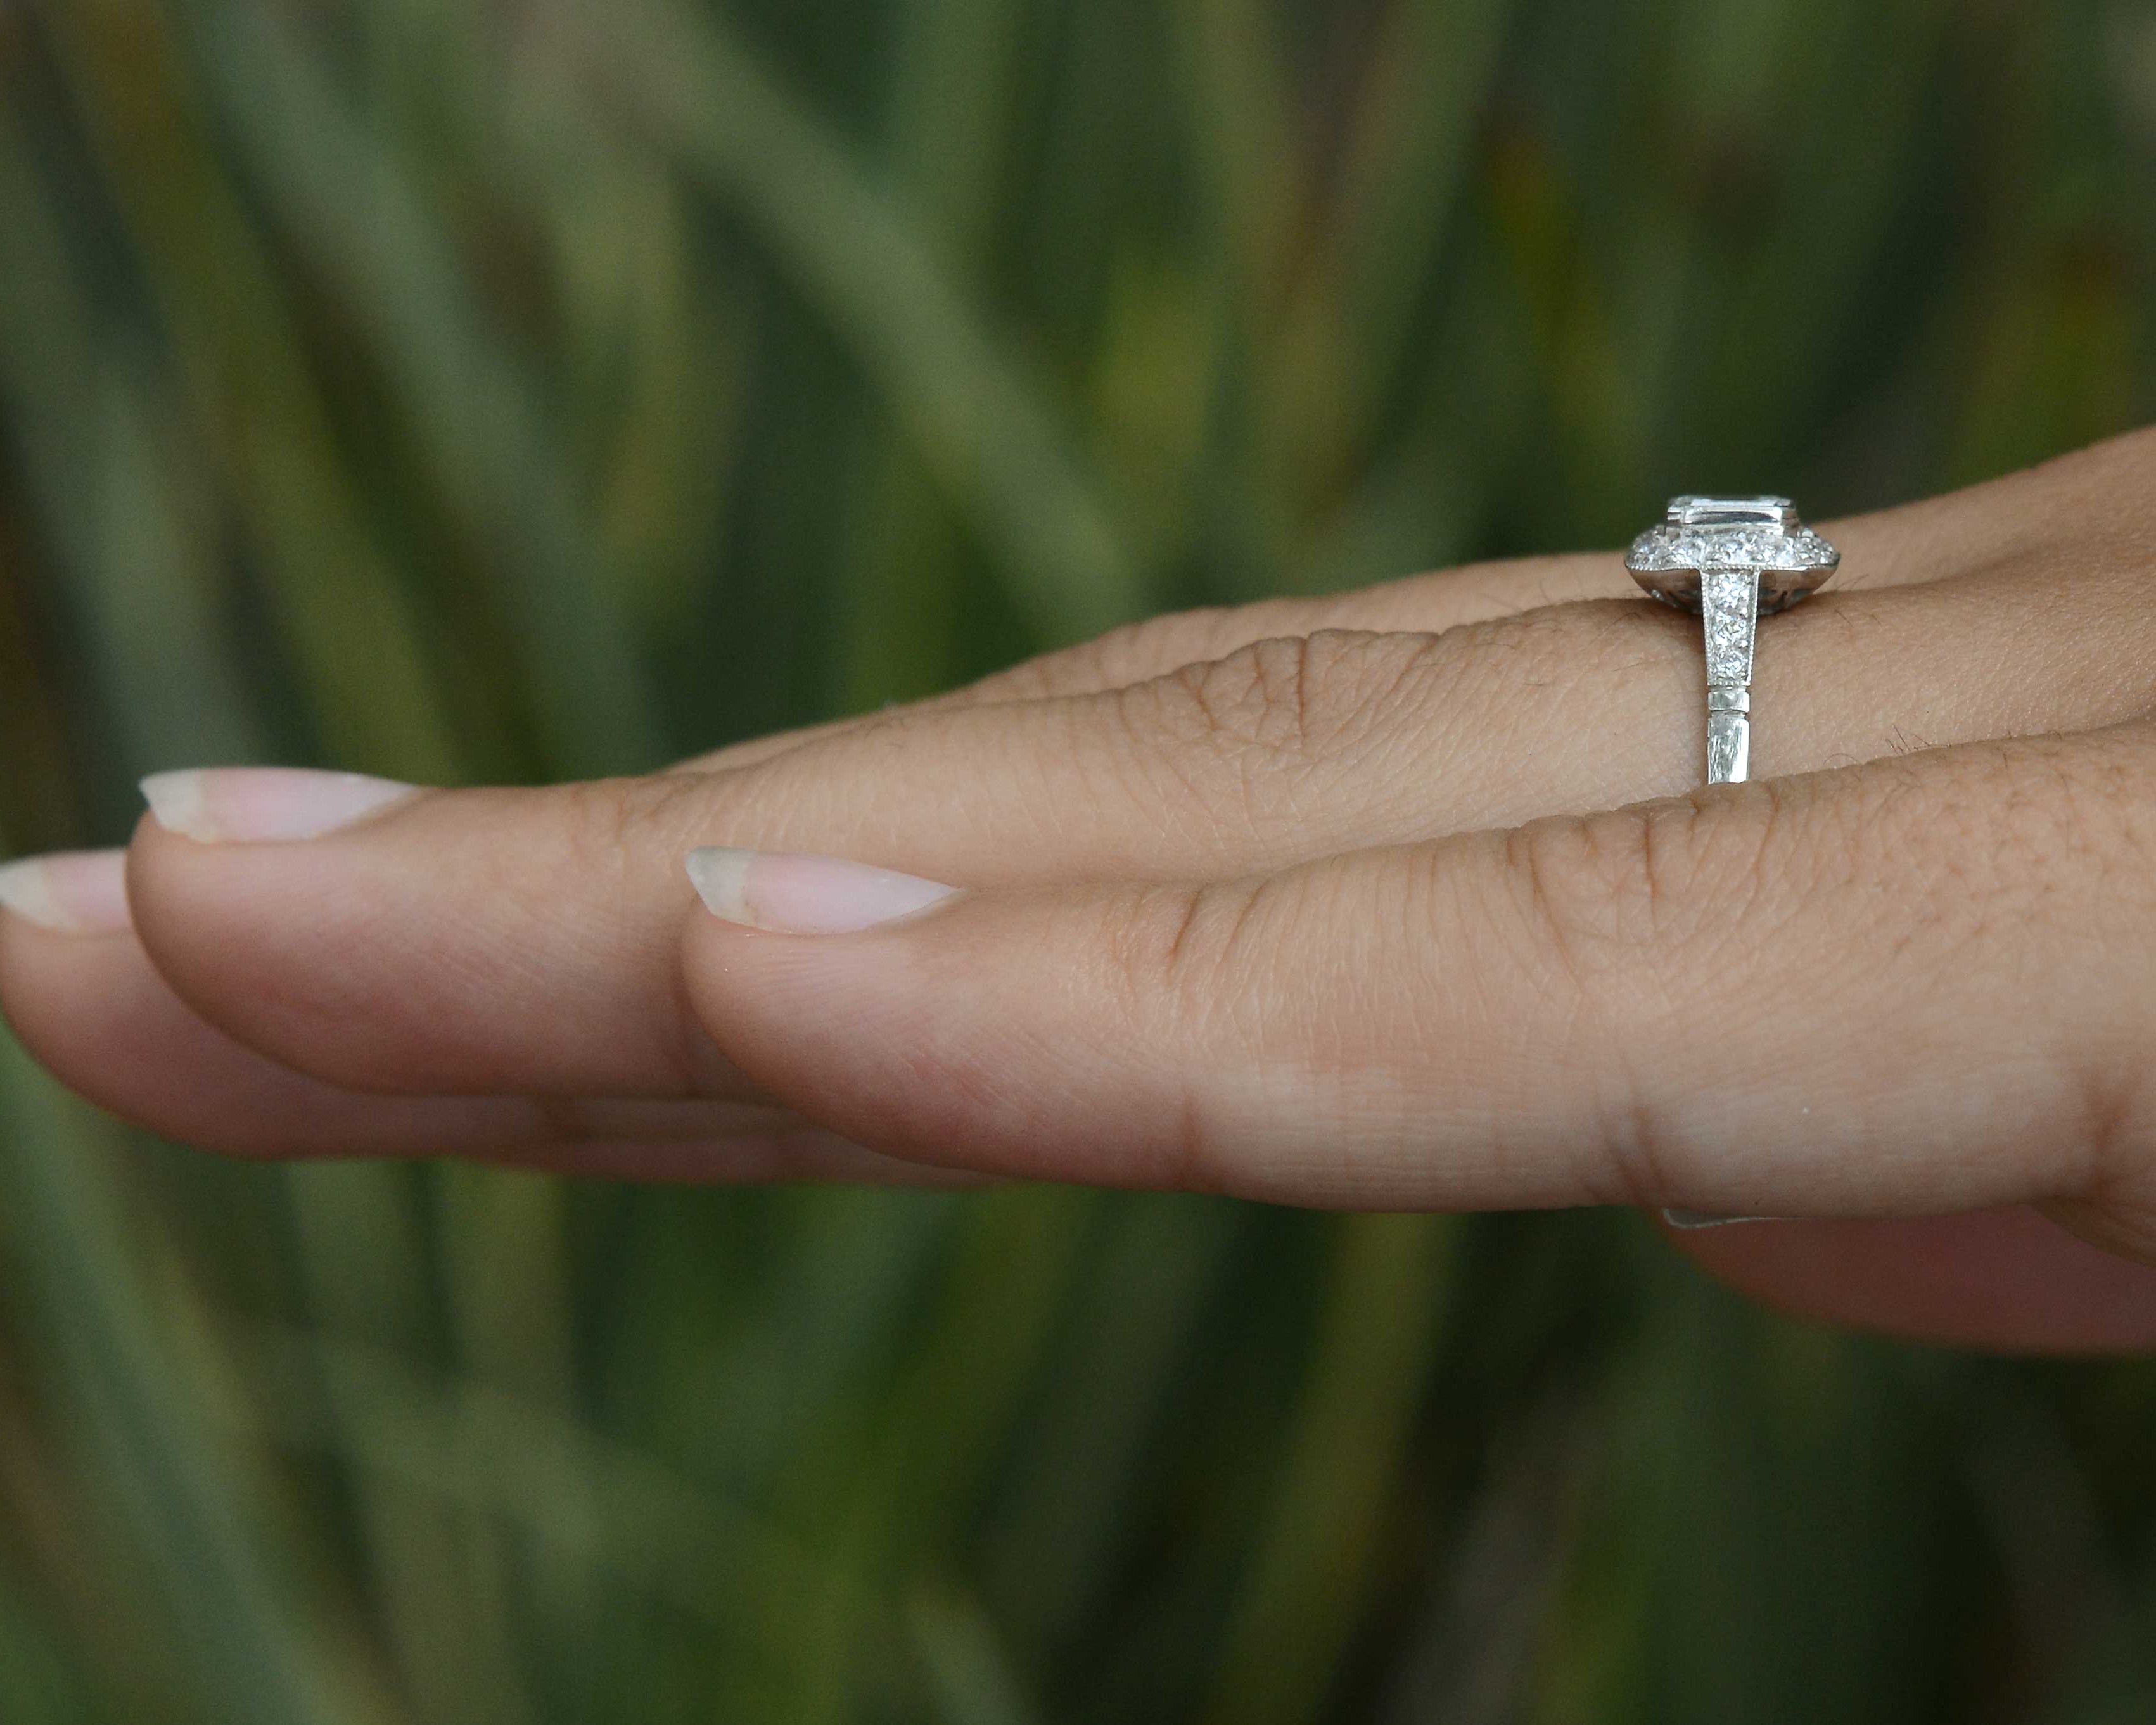 This bezel setting diamond wedding ring sits low on your hand.